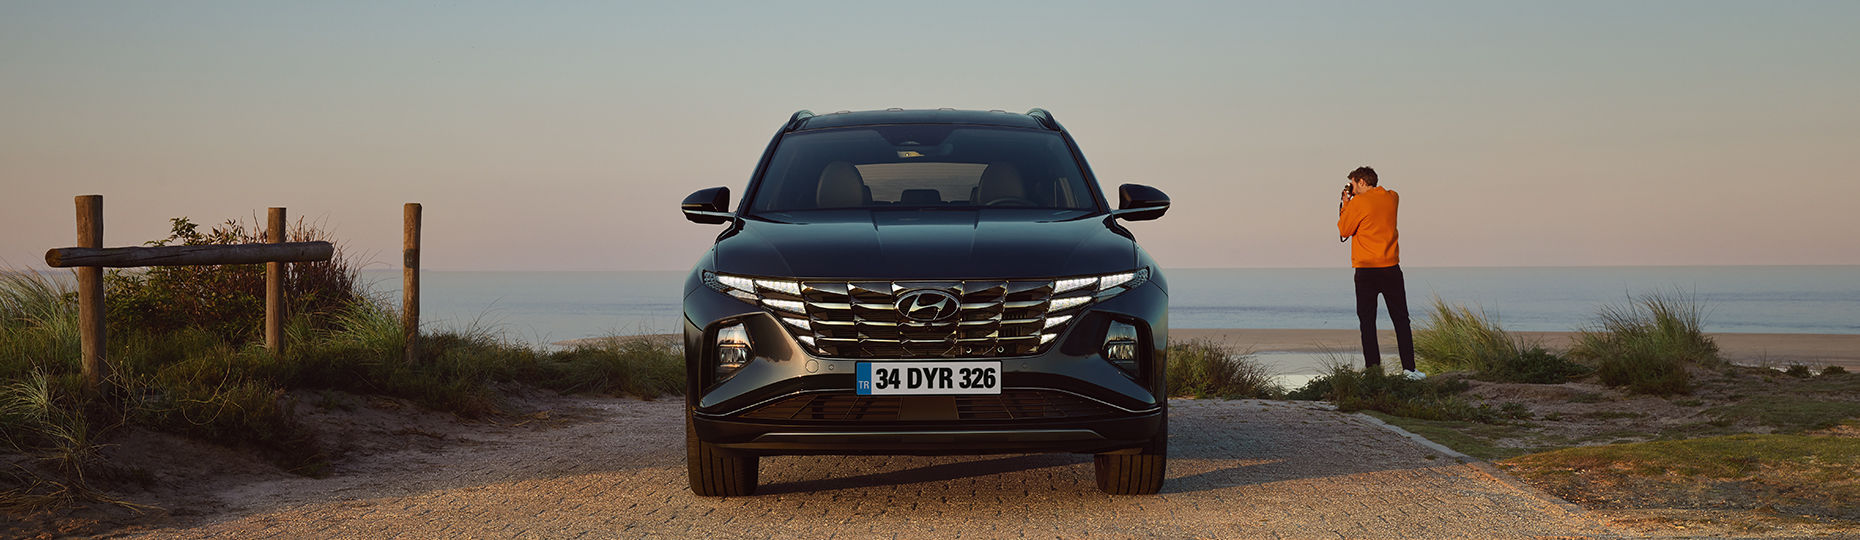 The all-new TUCSON specification key visual